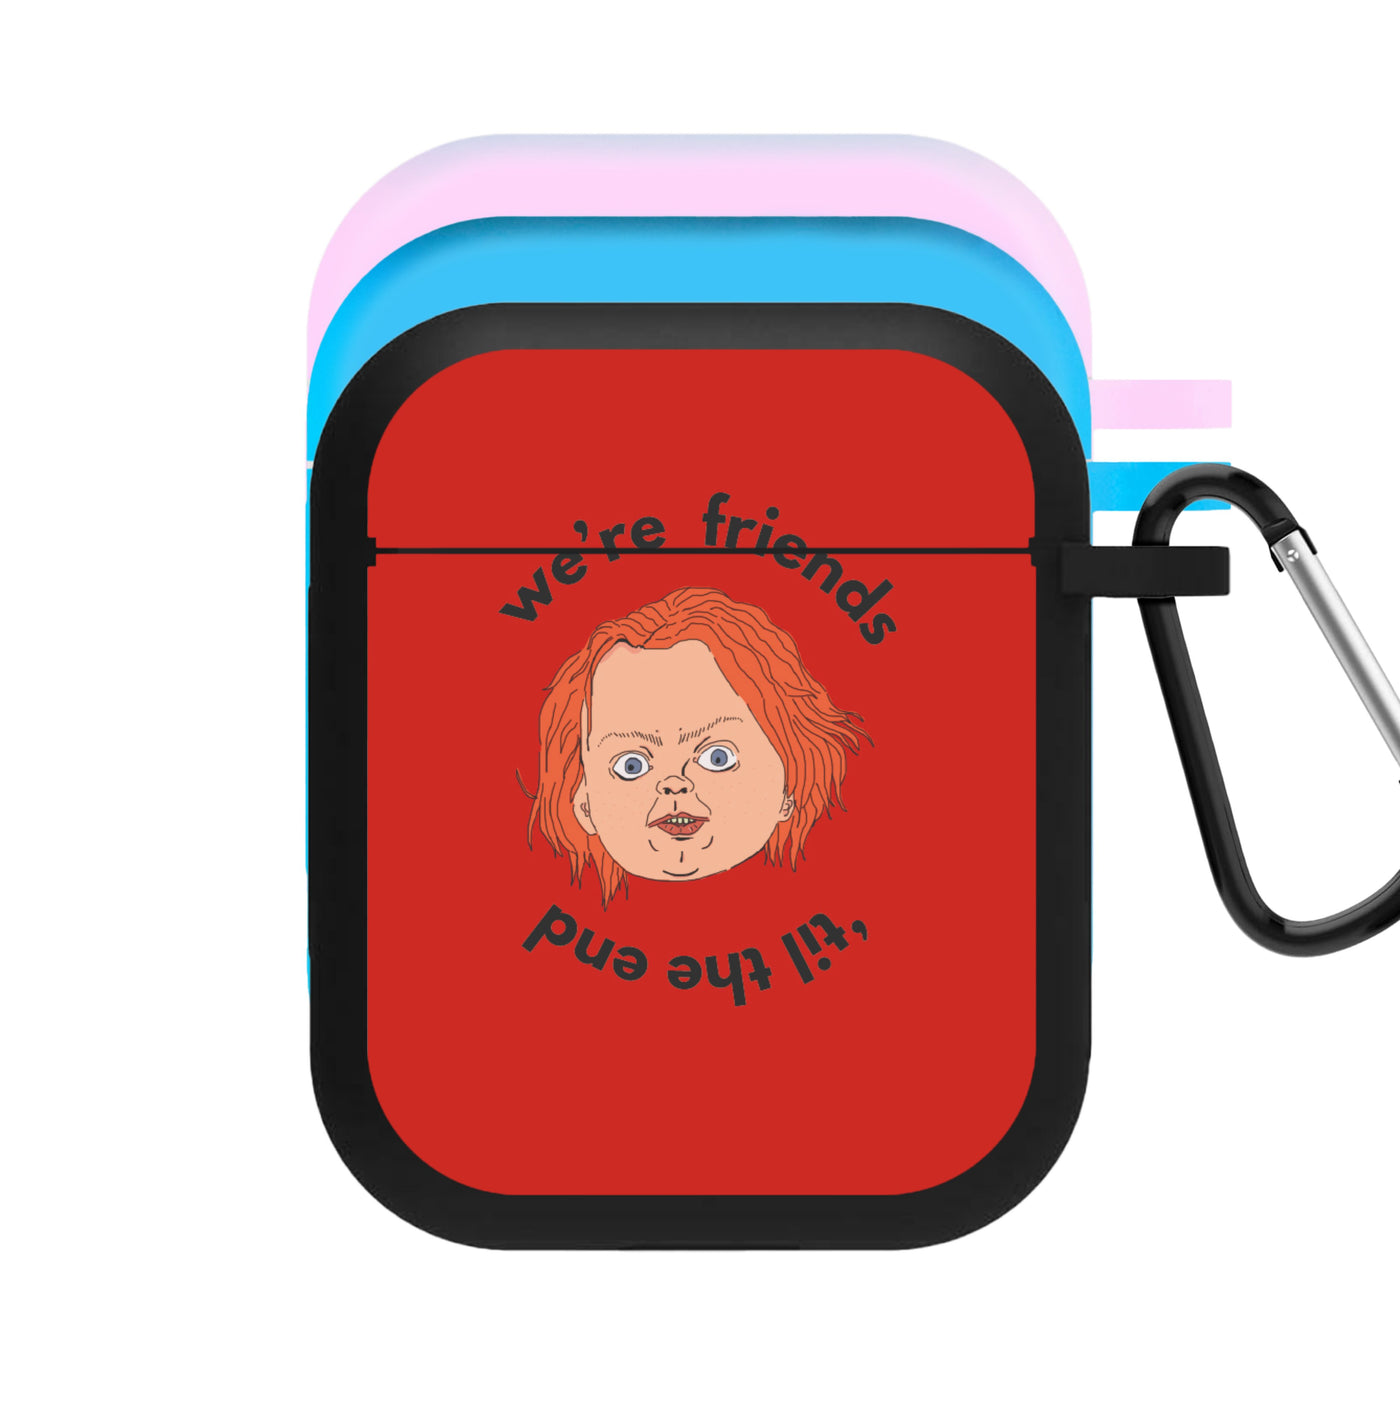 We're Friends 'til the end - Chucky AirPods Case